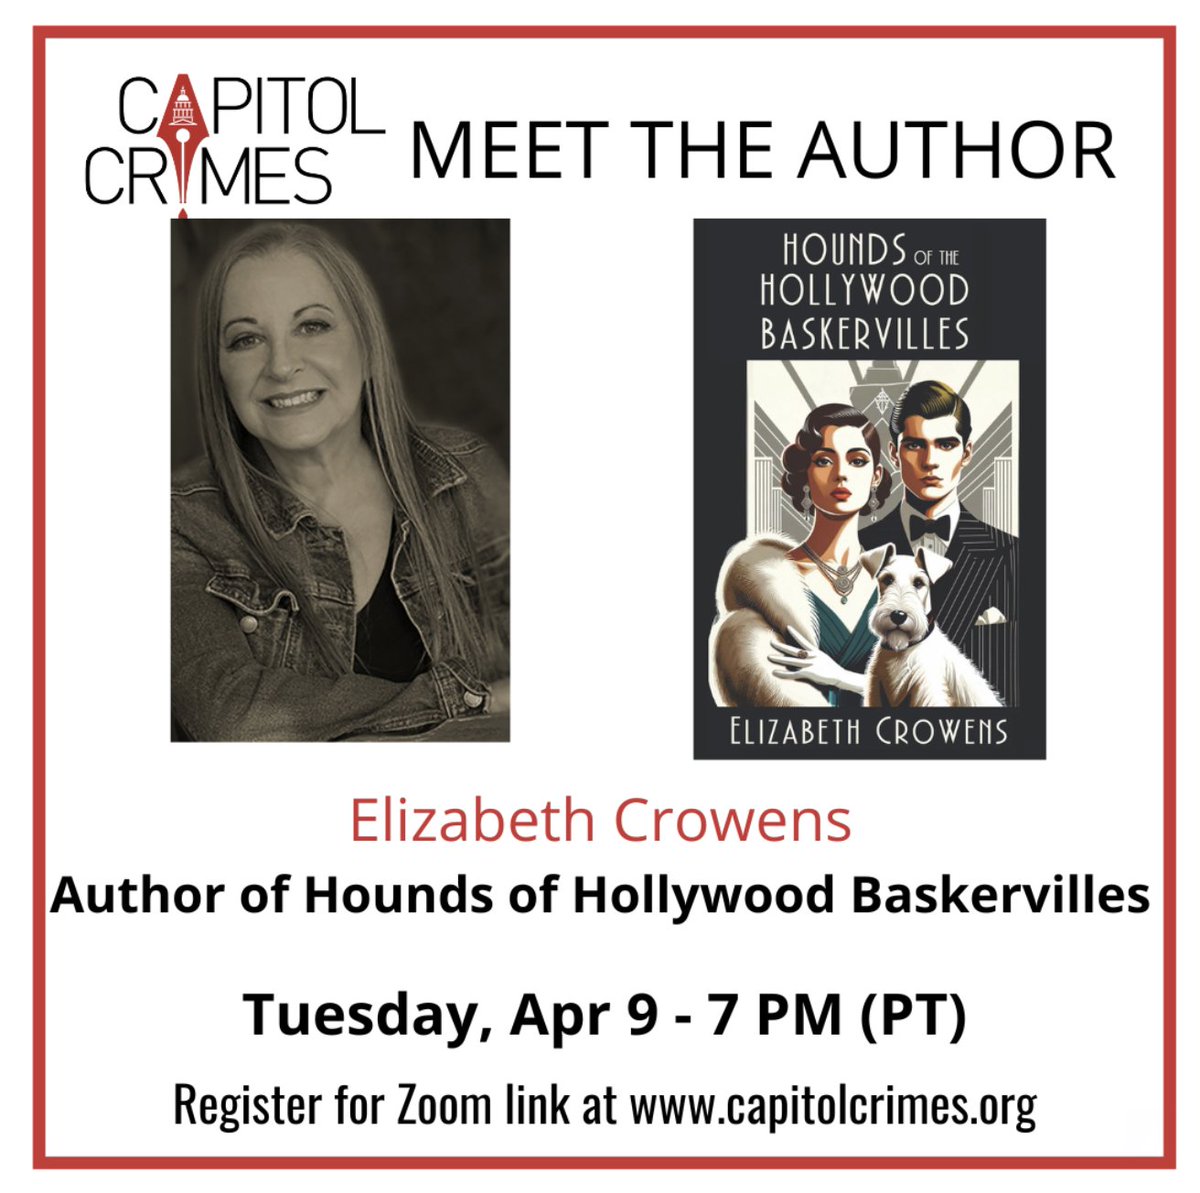 #zoom #zoomevent #authortalk #booktalk #interview #meettheauthor #sherlockholmes #thethinman #nickandnoracharles #goldenageofhollywood #hollywood #mystery #bookevent #bookevents @CapitolCrimes @sistersncrime